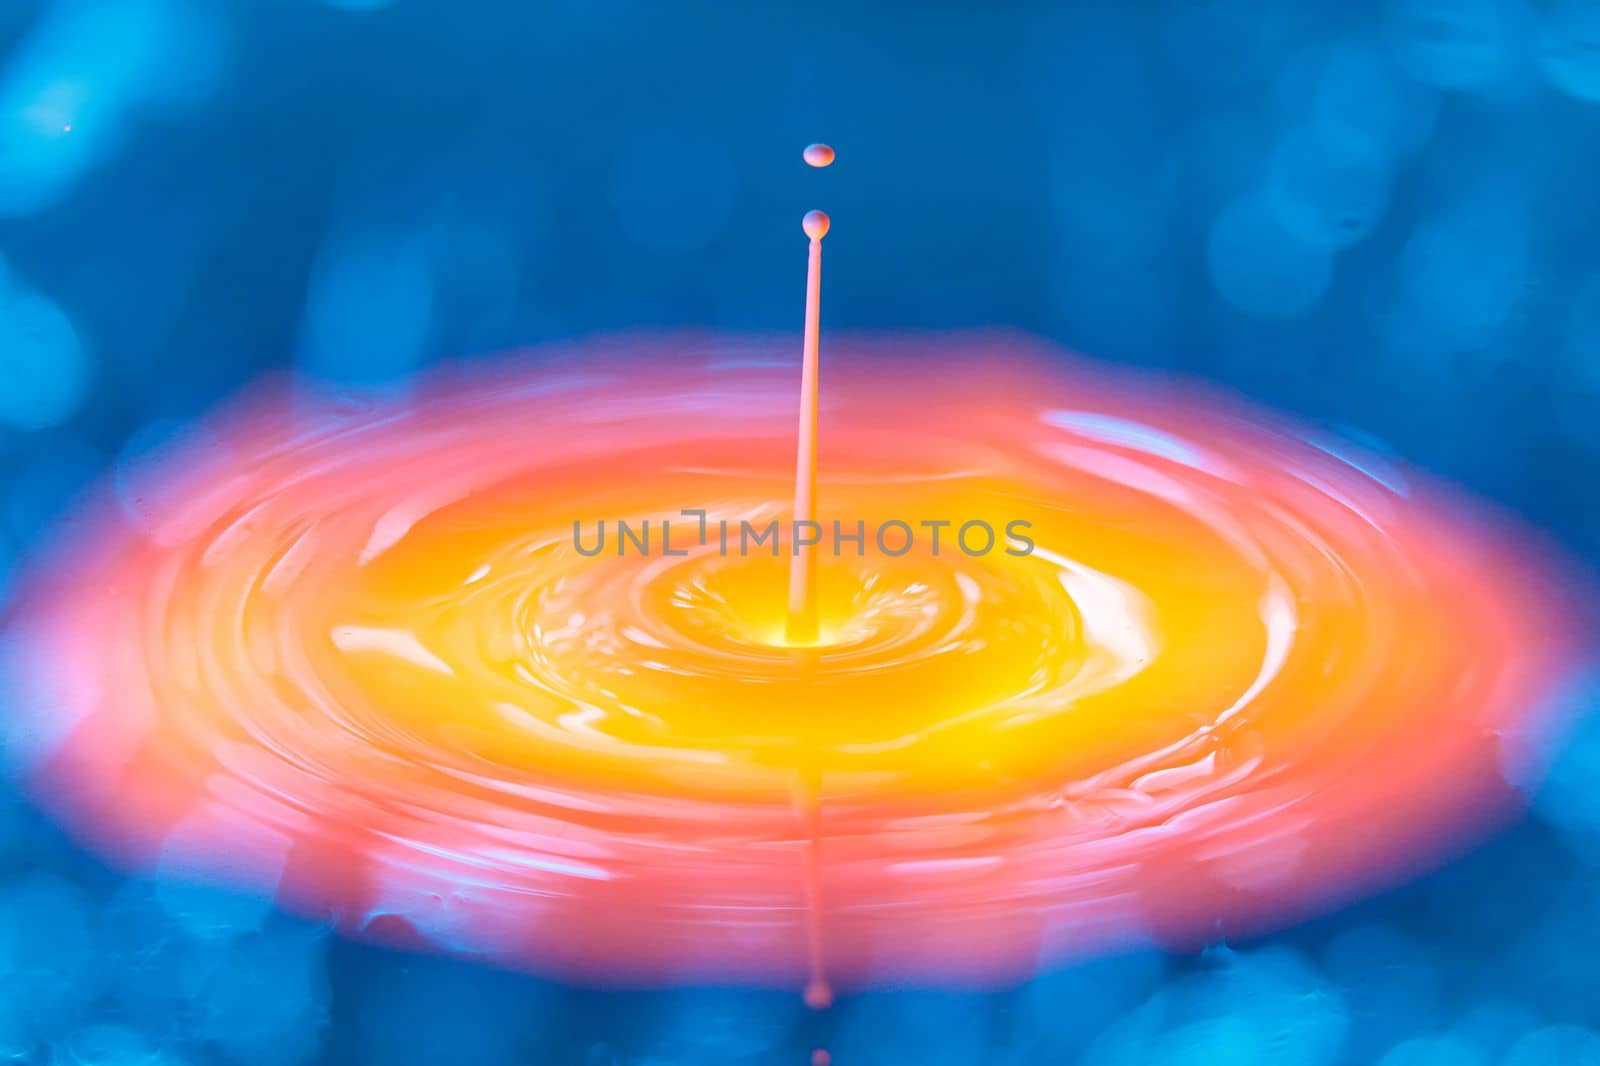 The drop falls into a dense liquid with a blue-yellow background. Abstract colorful background